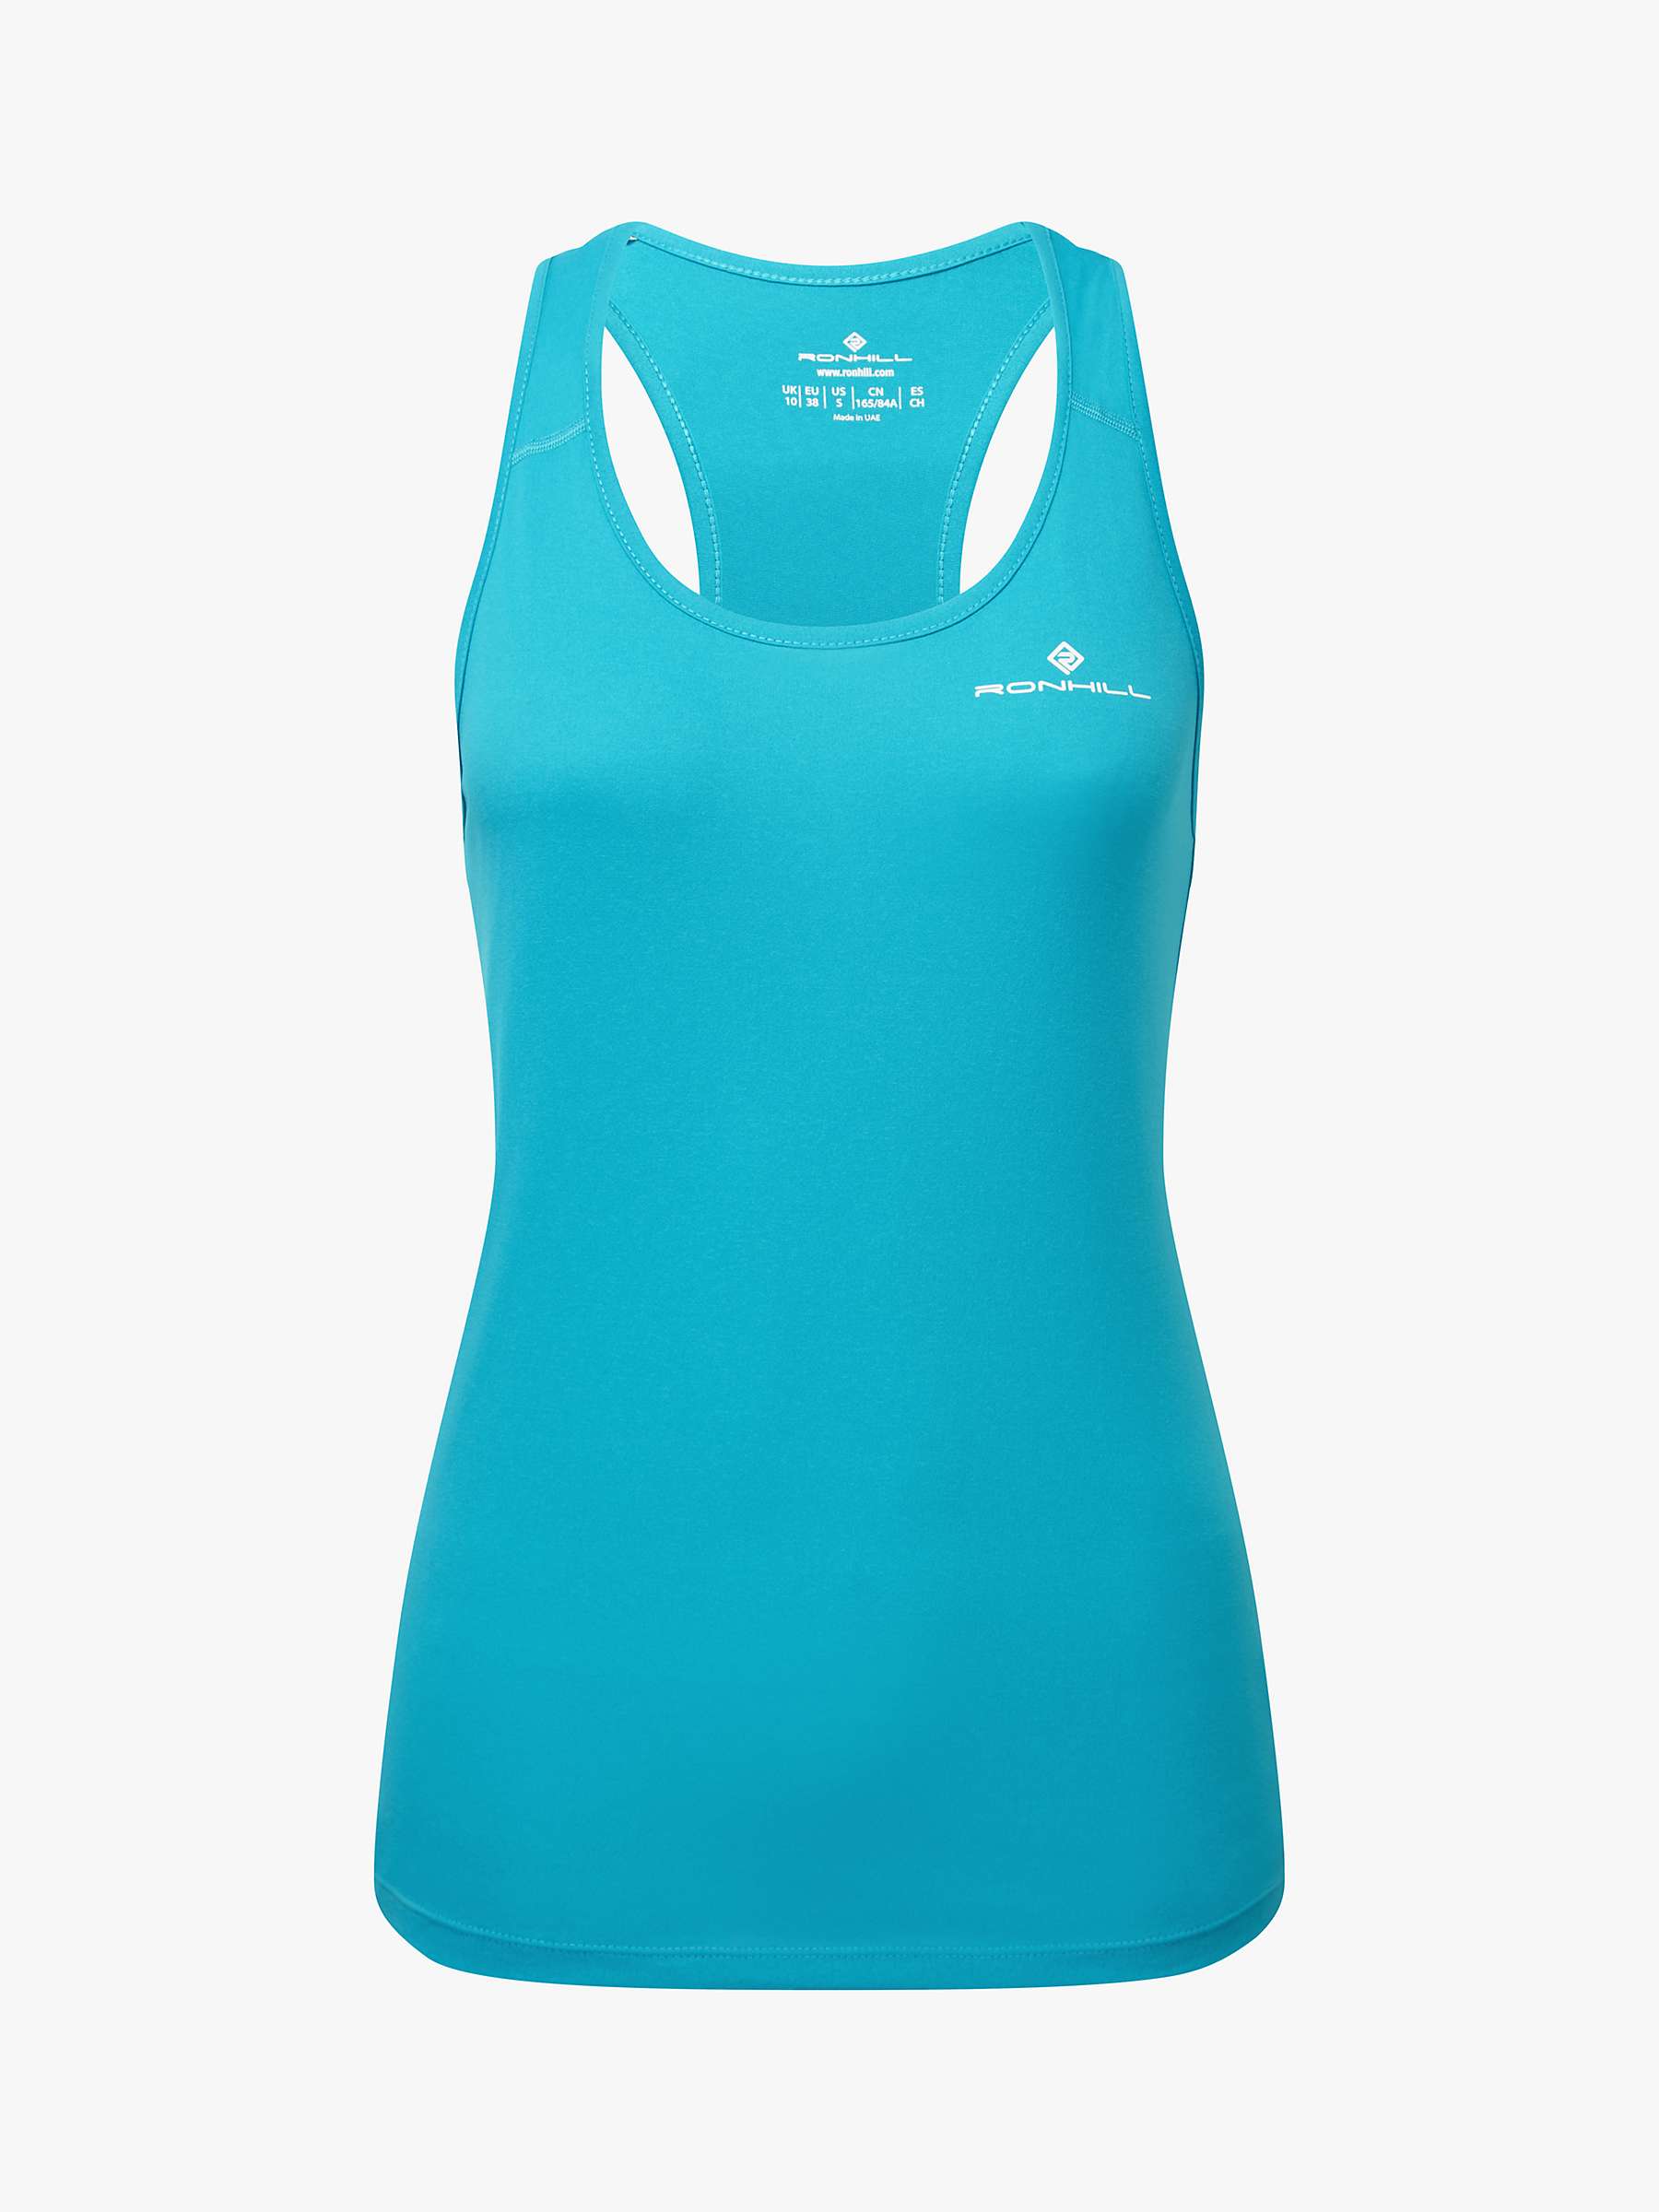 Buy Ronhill Core Running Vest Top, Turquoise Online at johnlewis.com